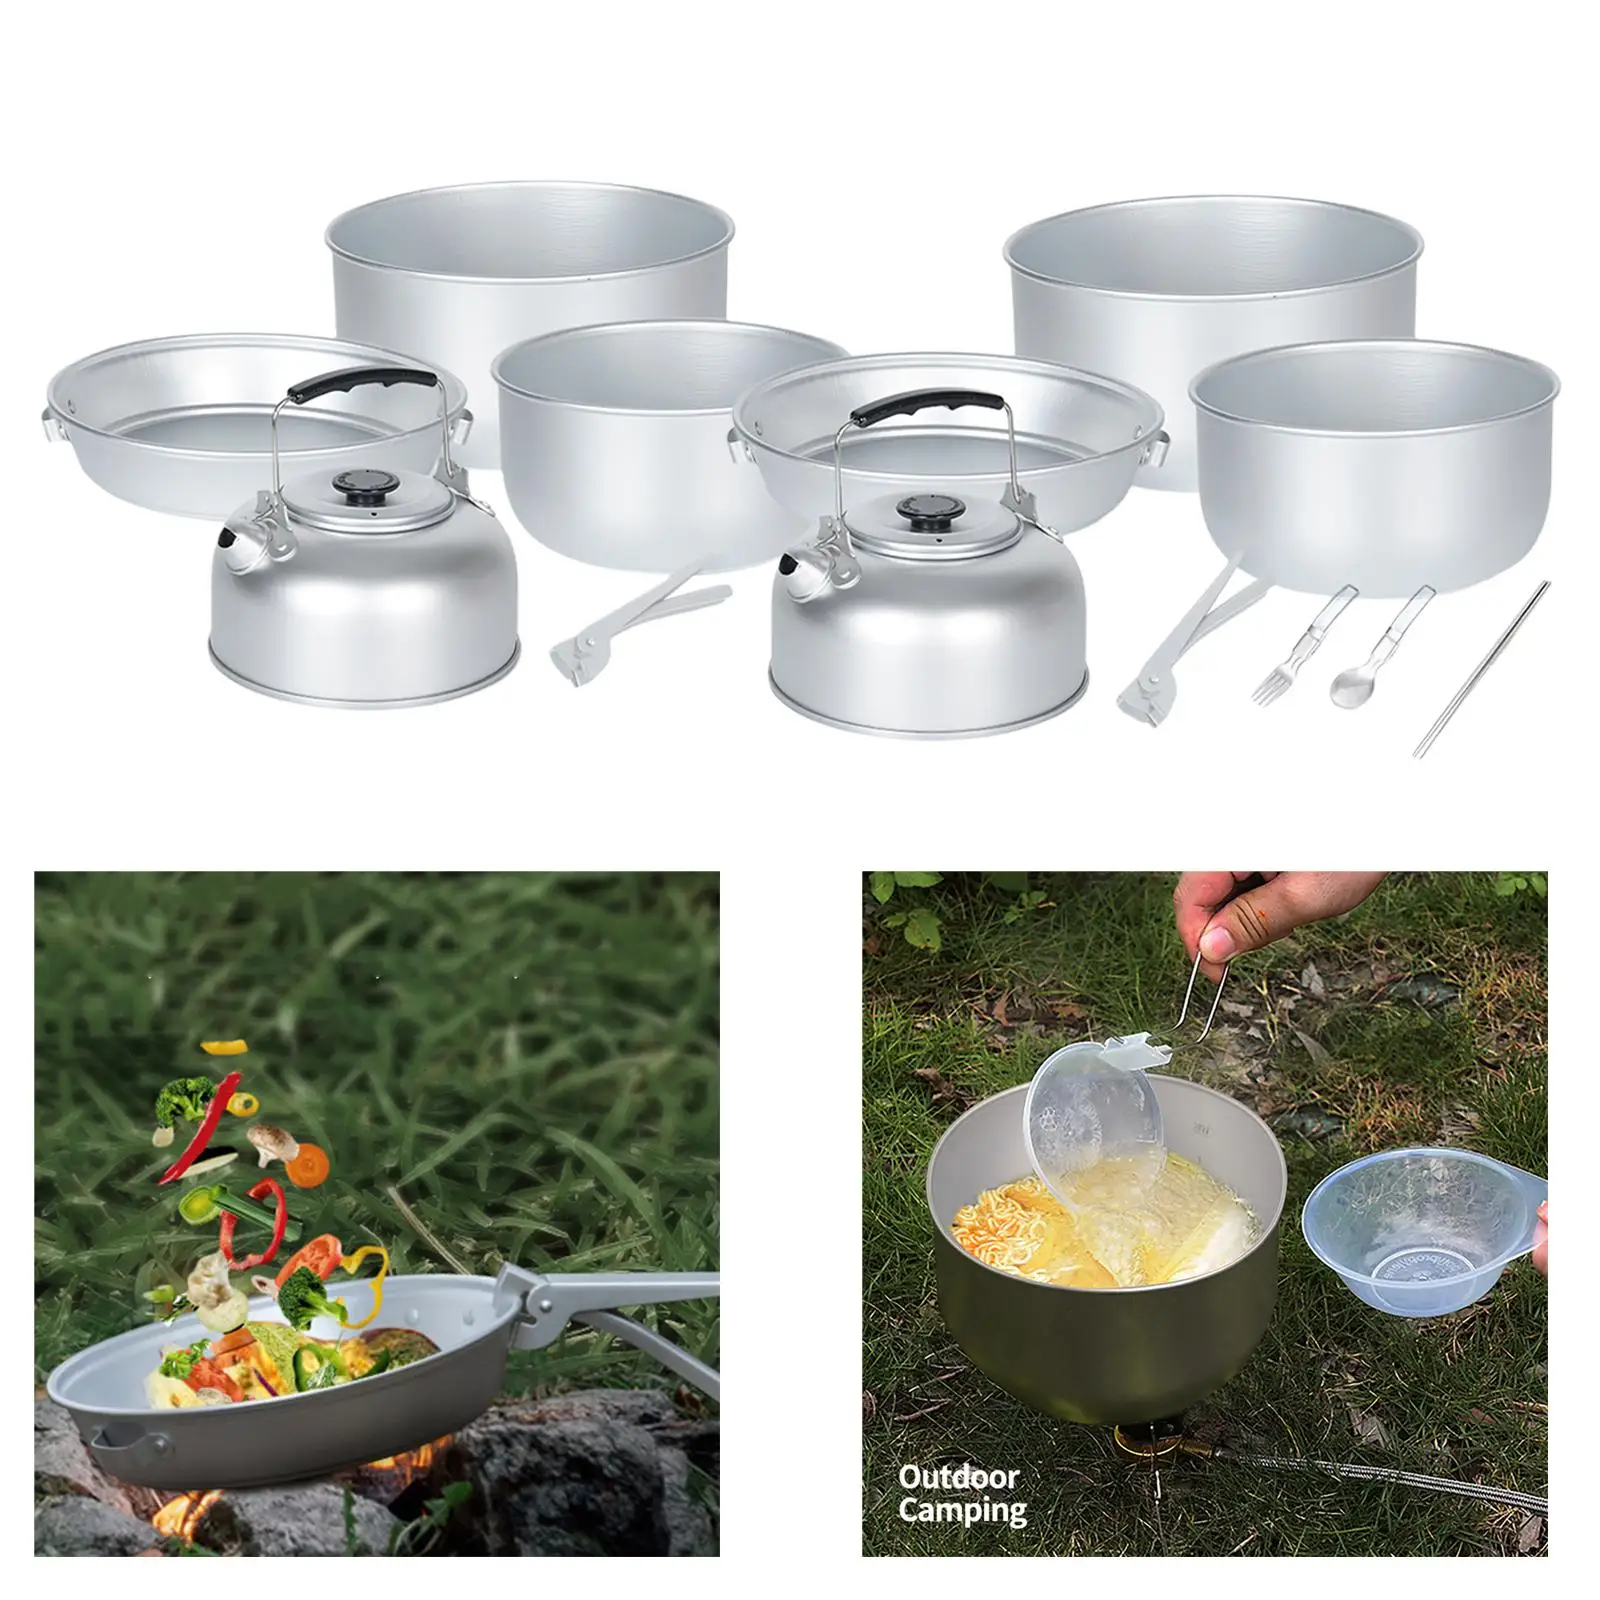 Lightweight Camping Cookware Set Wth Handle Cook Set Pan Aluminum Utensils Cooker for Outdoor Picnic Backpacking Campfire BBQ